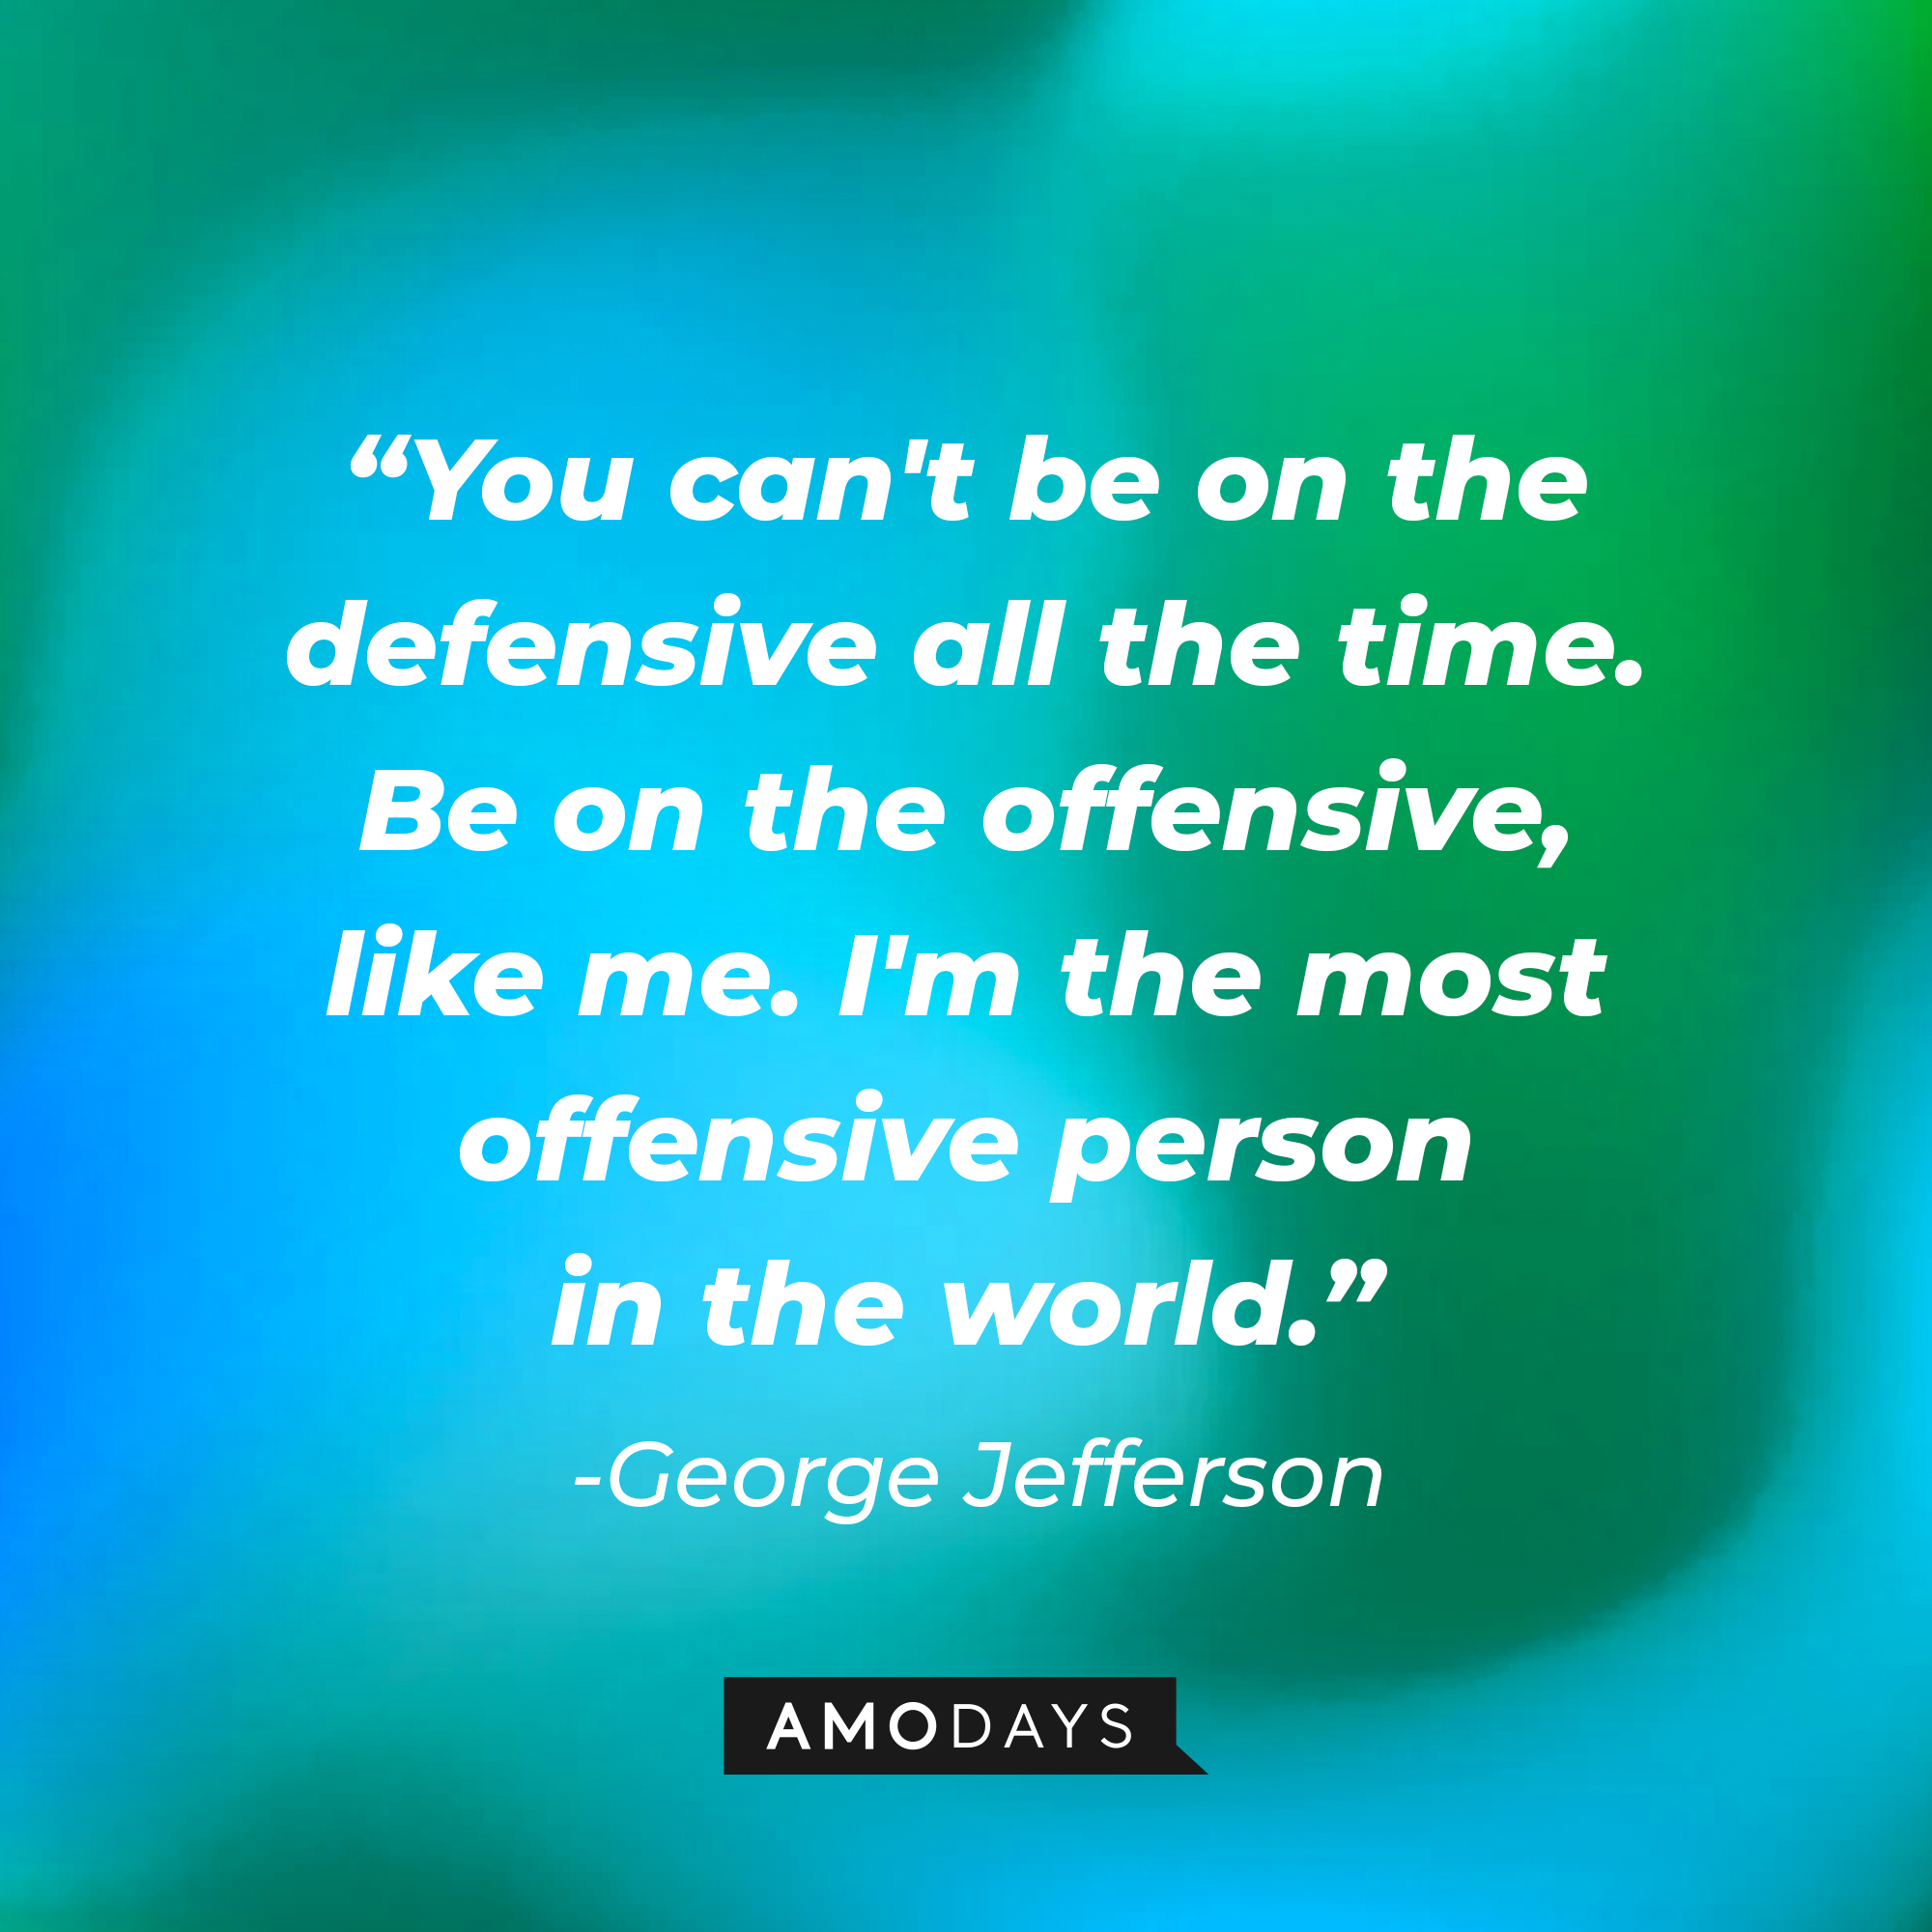 George Jefferson’s quote: “You can't be on the defensive all the time. Be on the offensive, like me. I'm the most offensive person in the world.” | Source: AmoDays